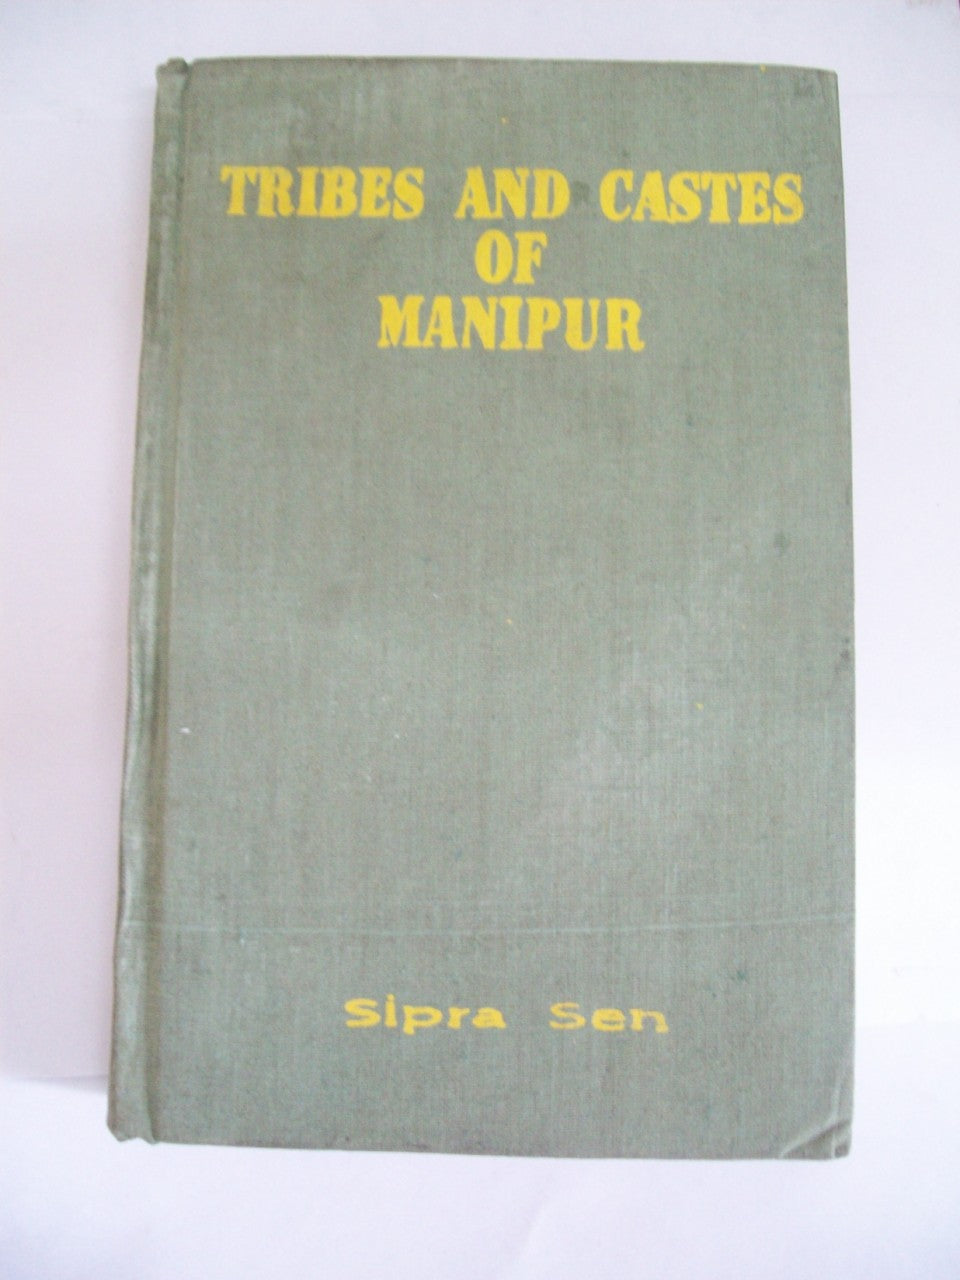 Tribes And Castes Of Manipur